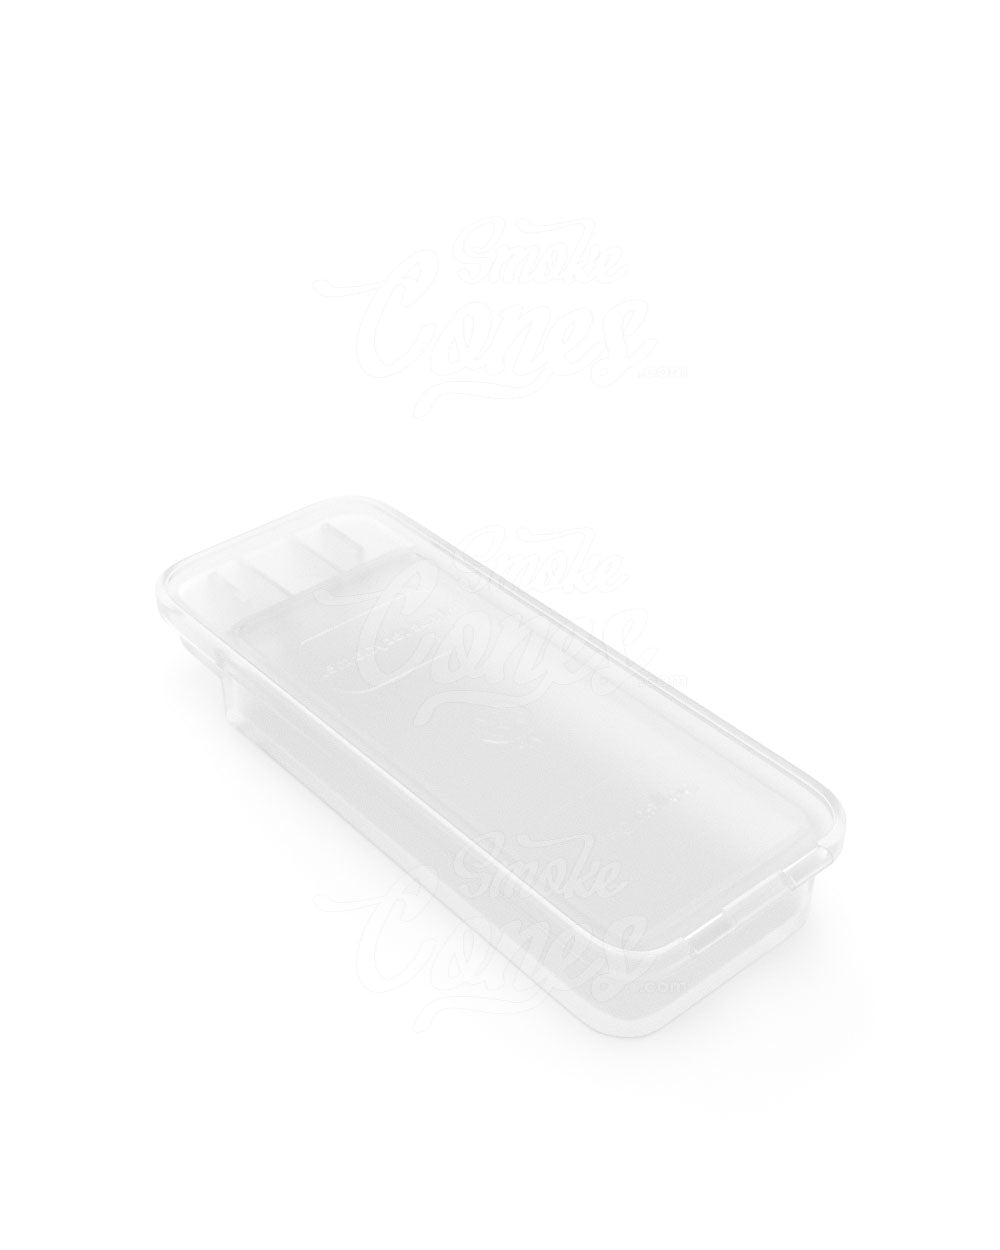 70mm Pollen Gear Clear SnapTech Child Resistant Edible & Pre-Roll Small Joint Case 240/Box - 6